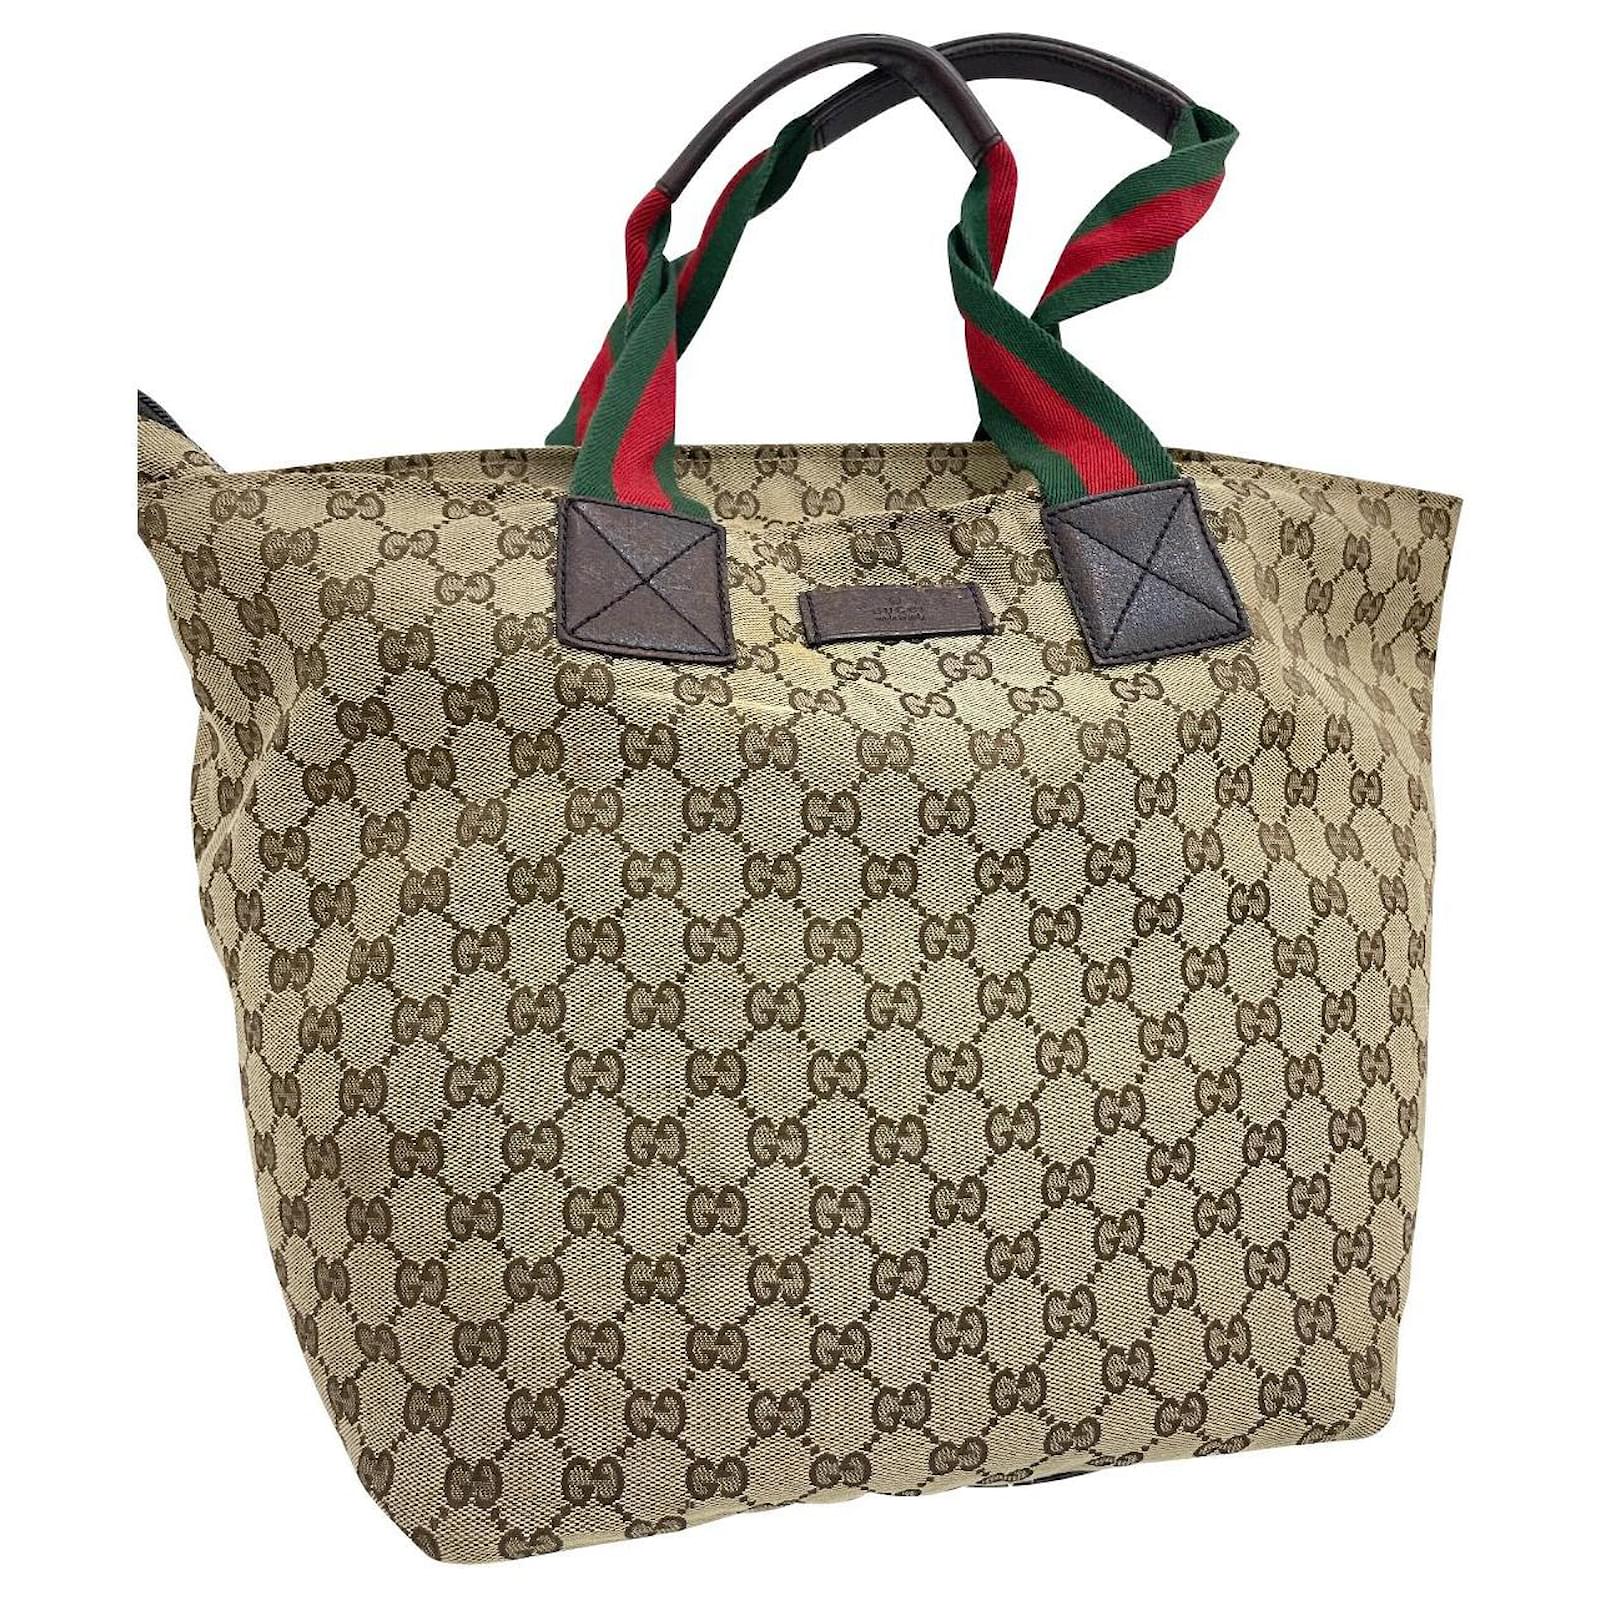 Gucci Women's Ophidia GG Large Tote Bag